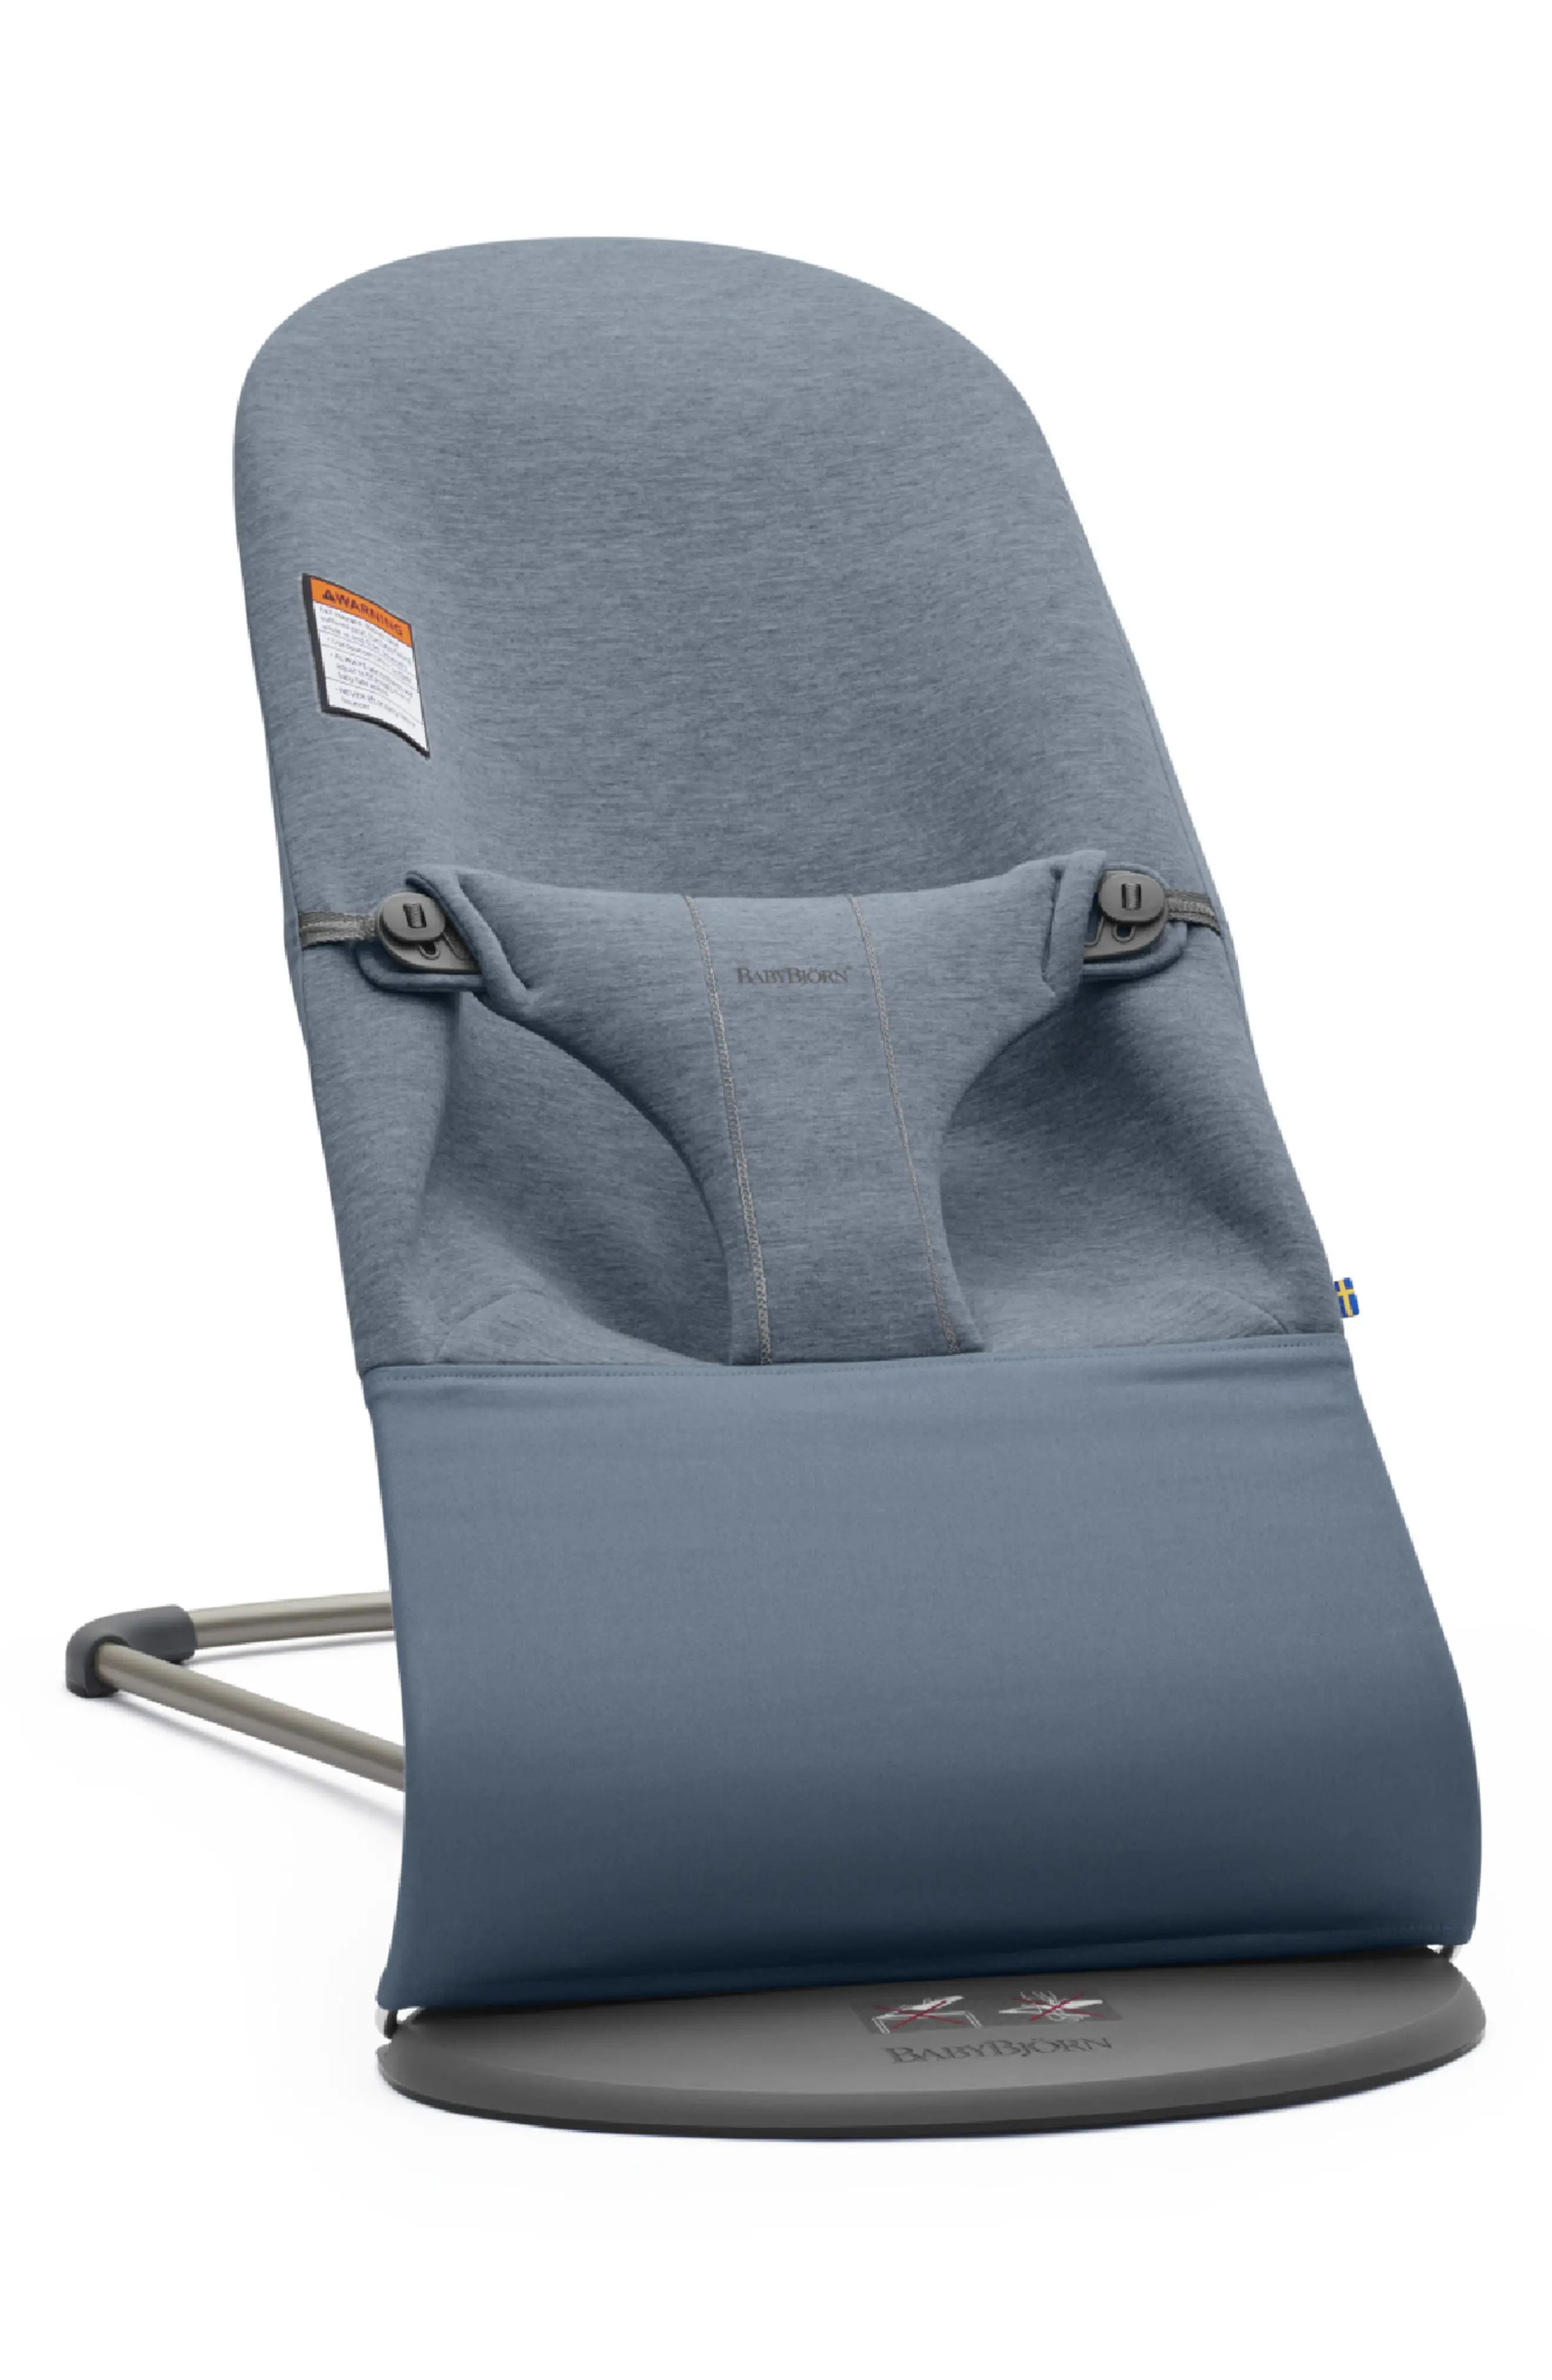 BabyBjorn Bouncer Bliss Convertible Jersey Baby Bouncer in Dove Blue at Nordstrom | Nordstrom